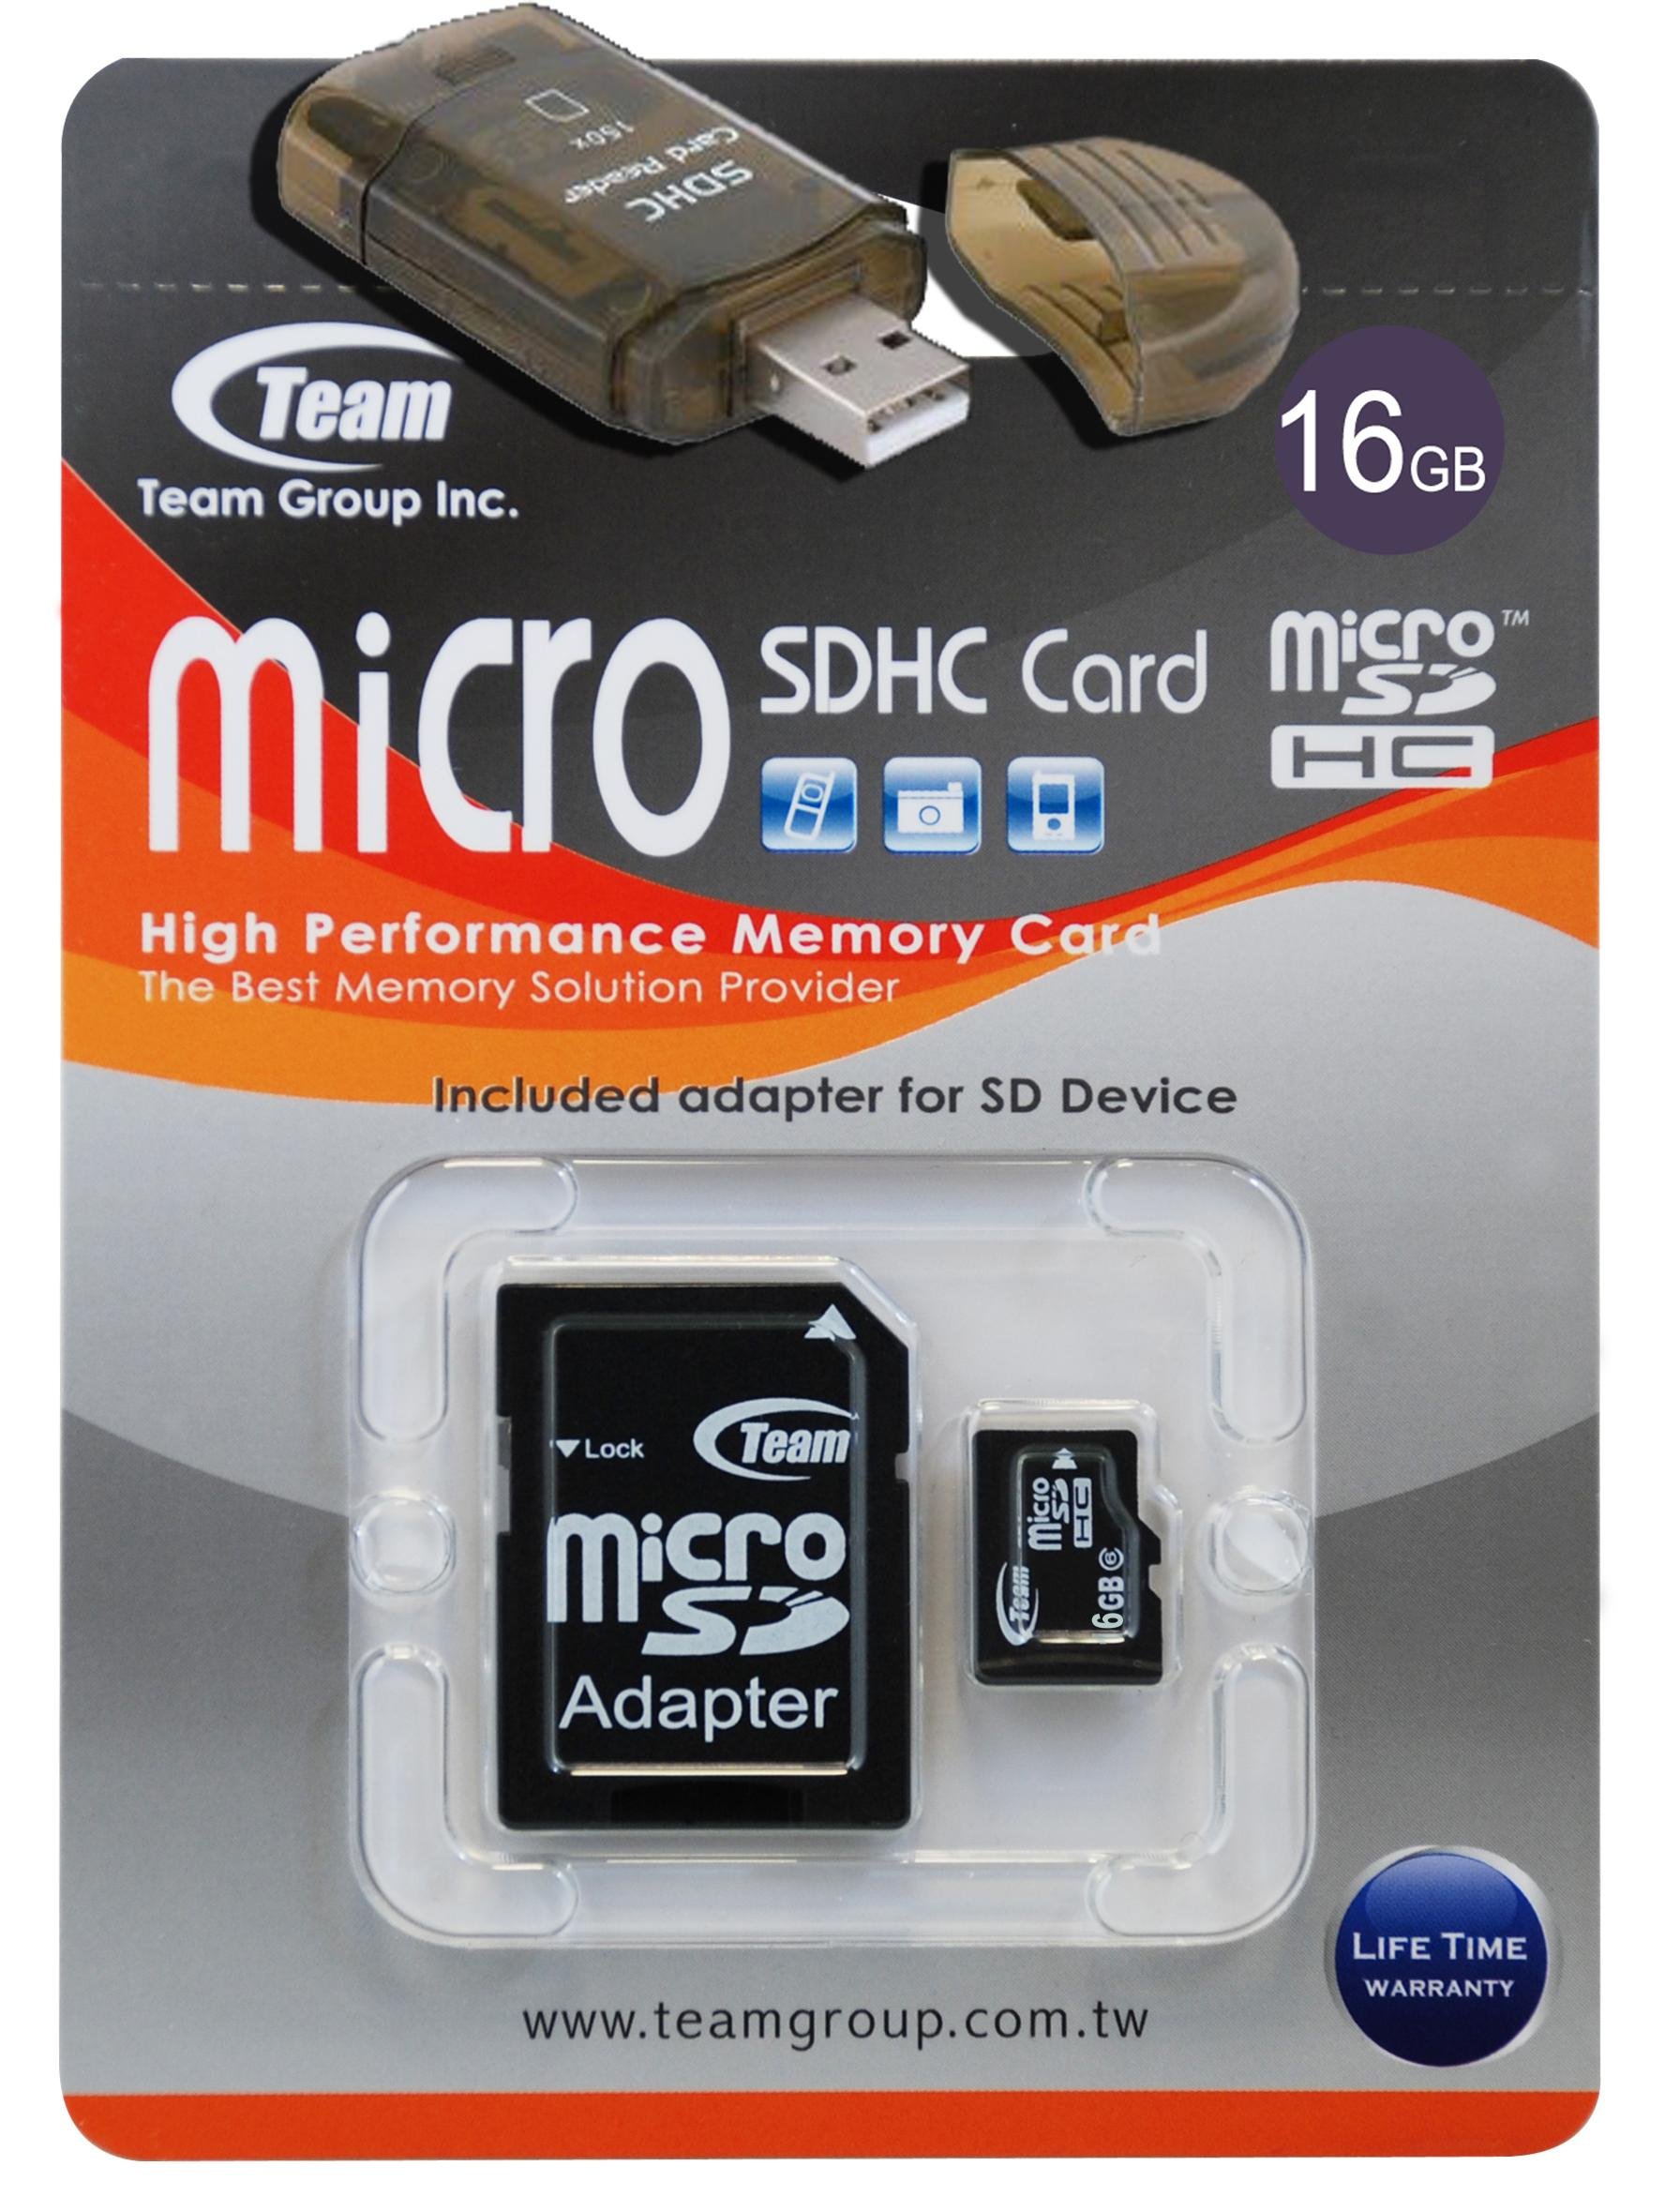 16GB Turbo Speed Class 6 MicroSDHC Memory Card For NOKIA Nuron Slide Snapper. High Speed Card Comes with a free SD and USB Ad